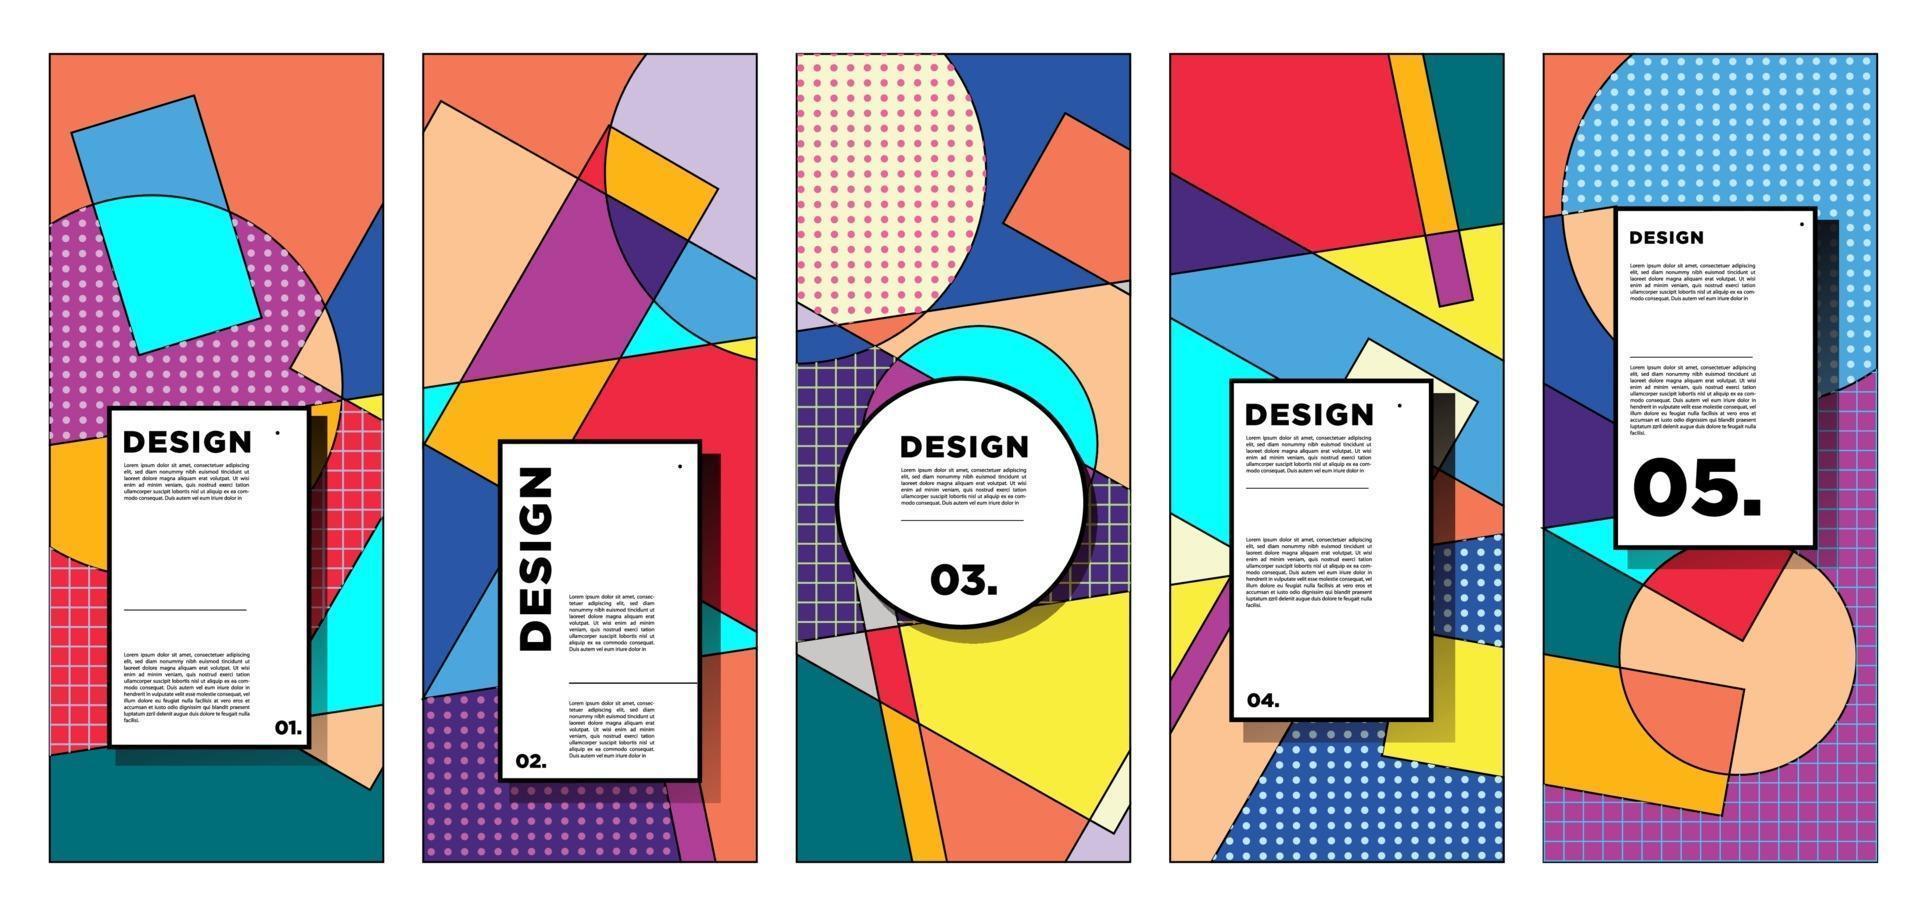 Vector vertical banner design template with colorful abstract geometric background